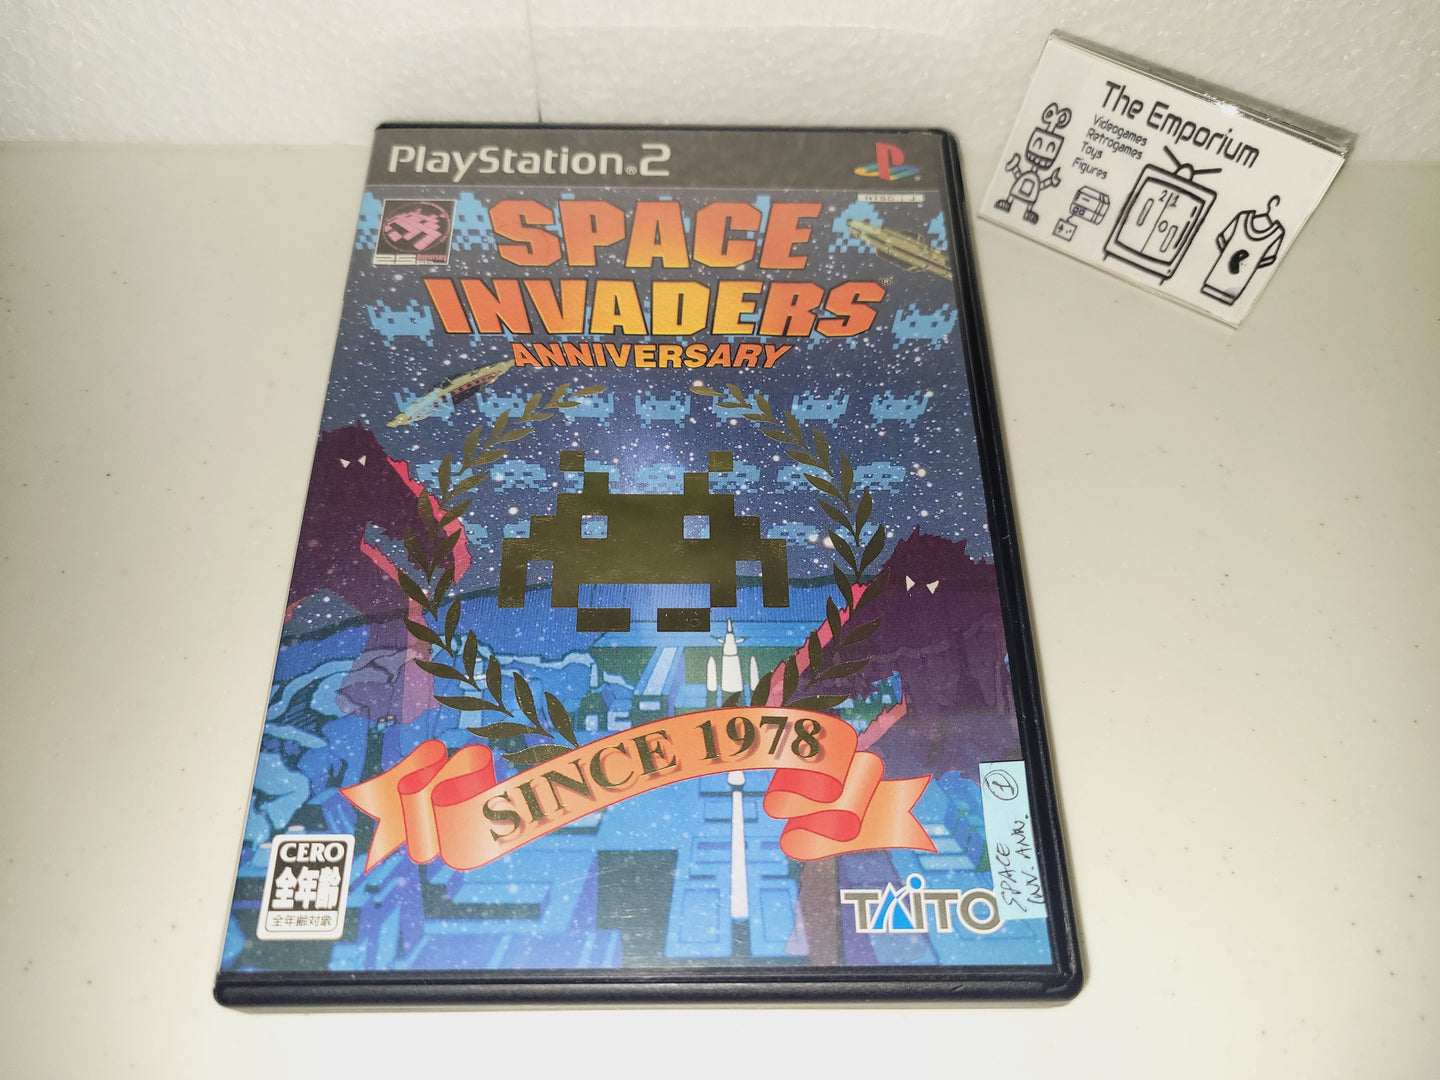 Space Invaders Anniversary - Sony playstation 2